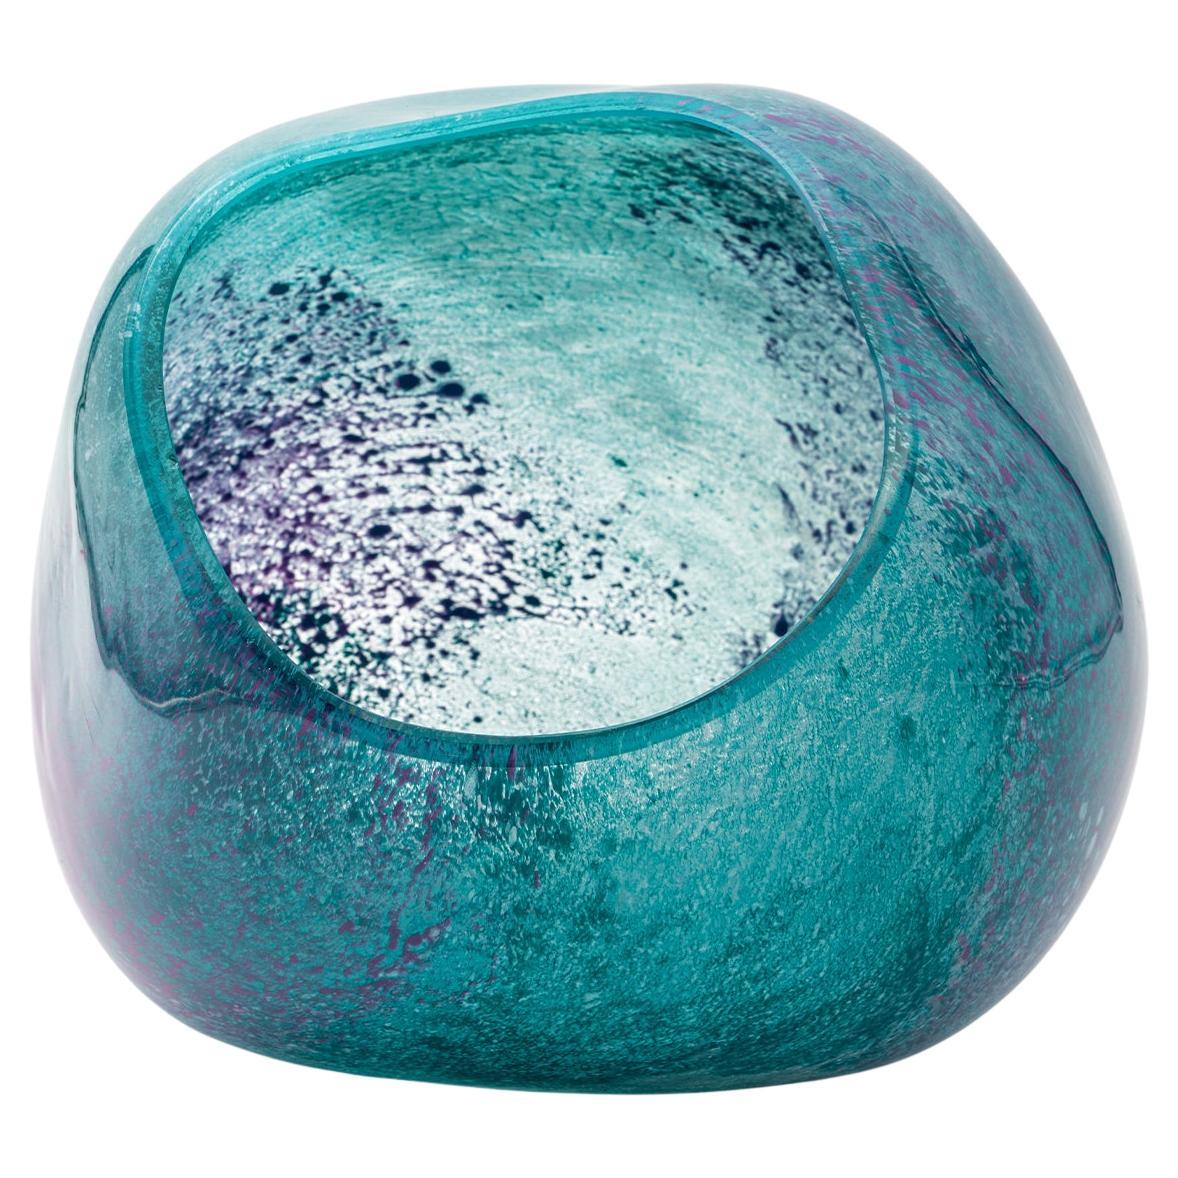 Turquoise and Lilac Color Amorphous Blown Glass Vase No:1